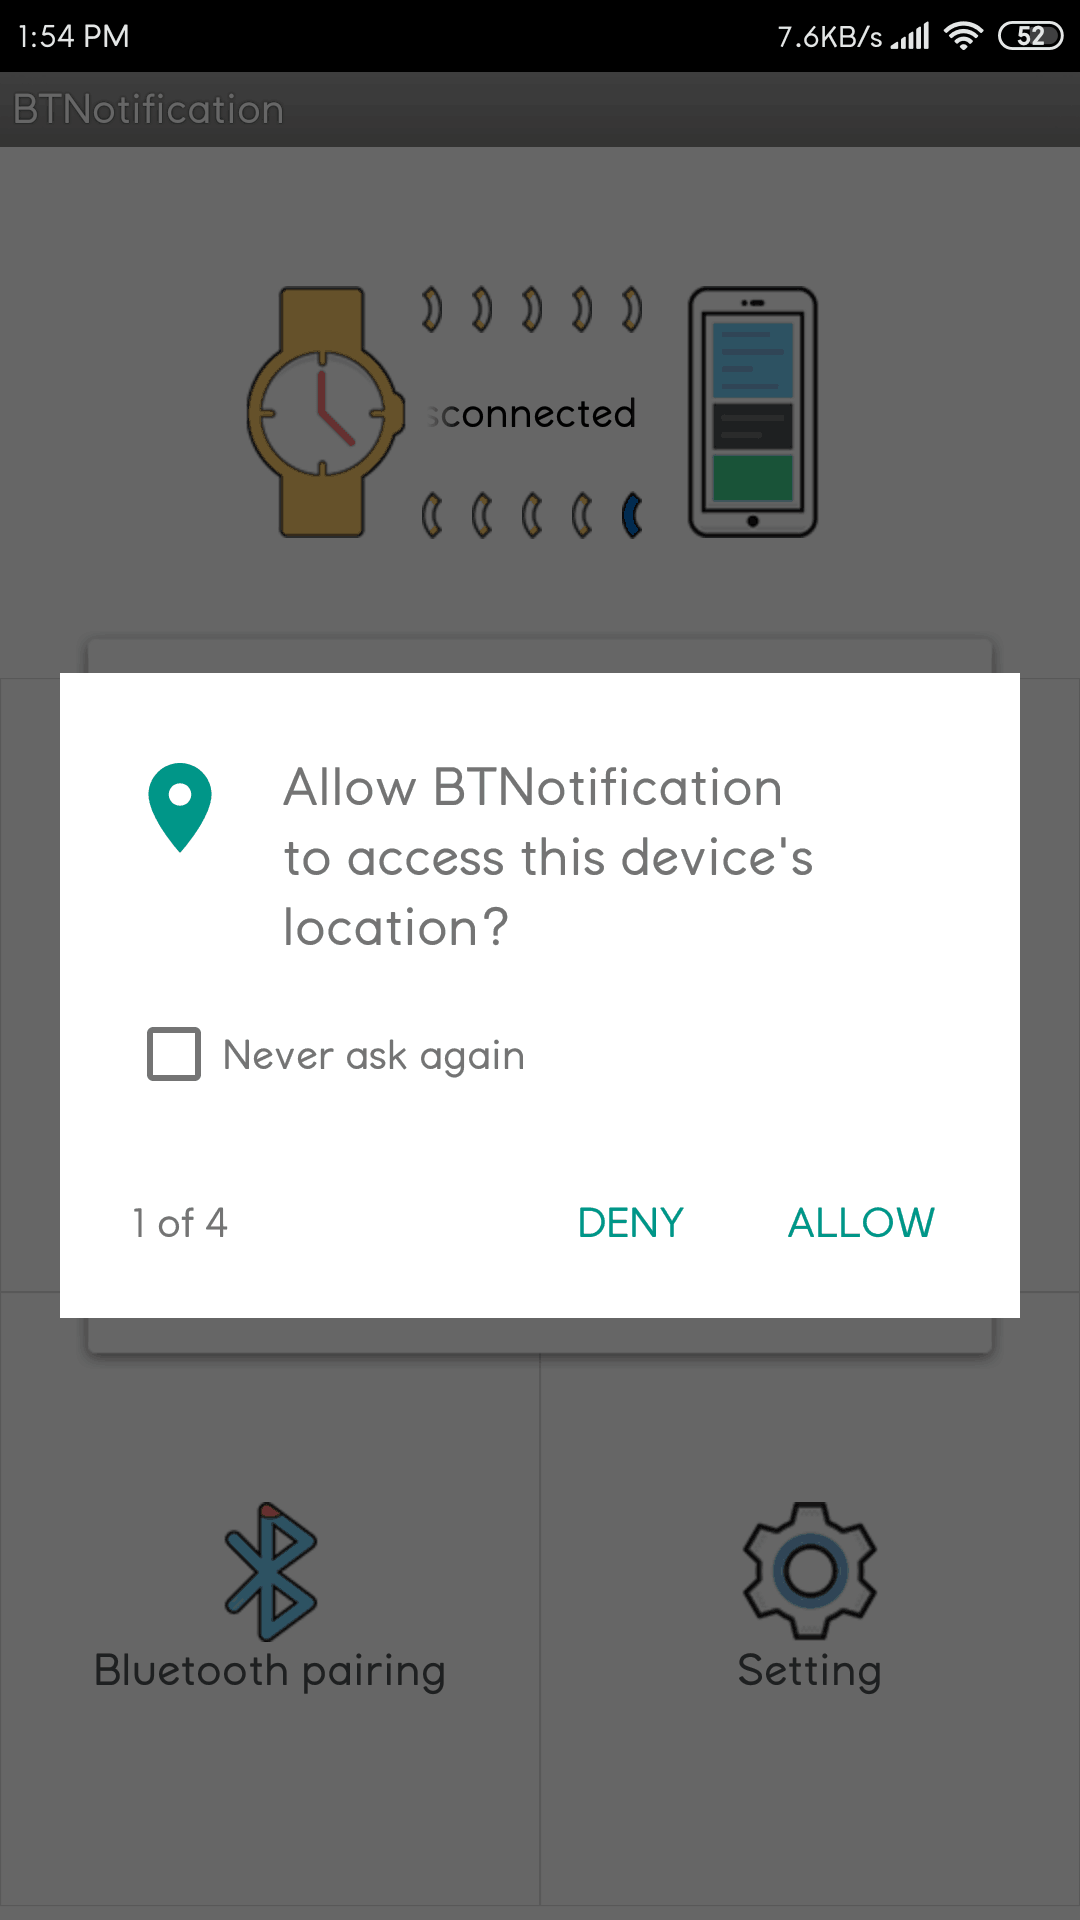 BT Notification App Required Permissions